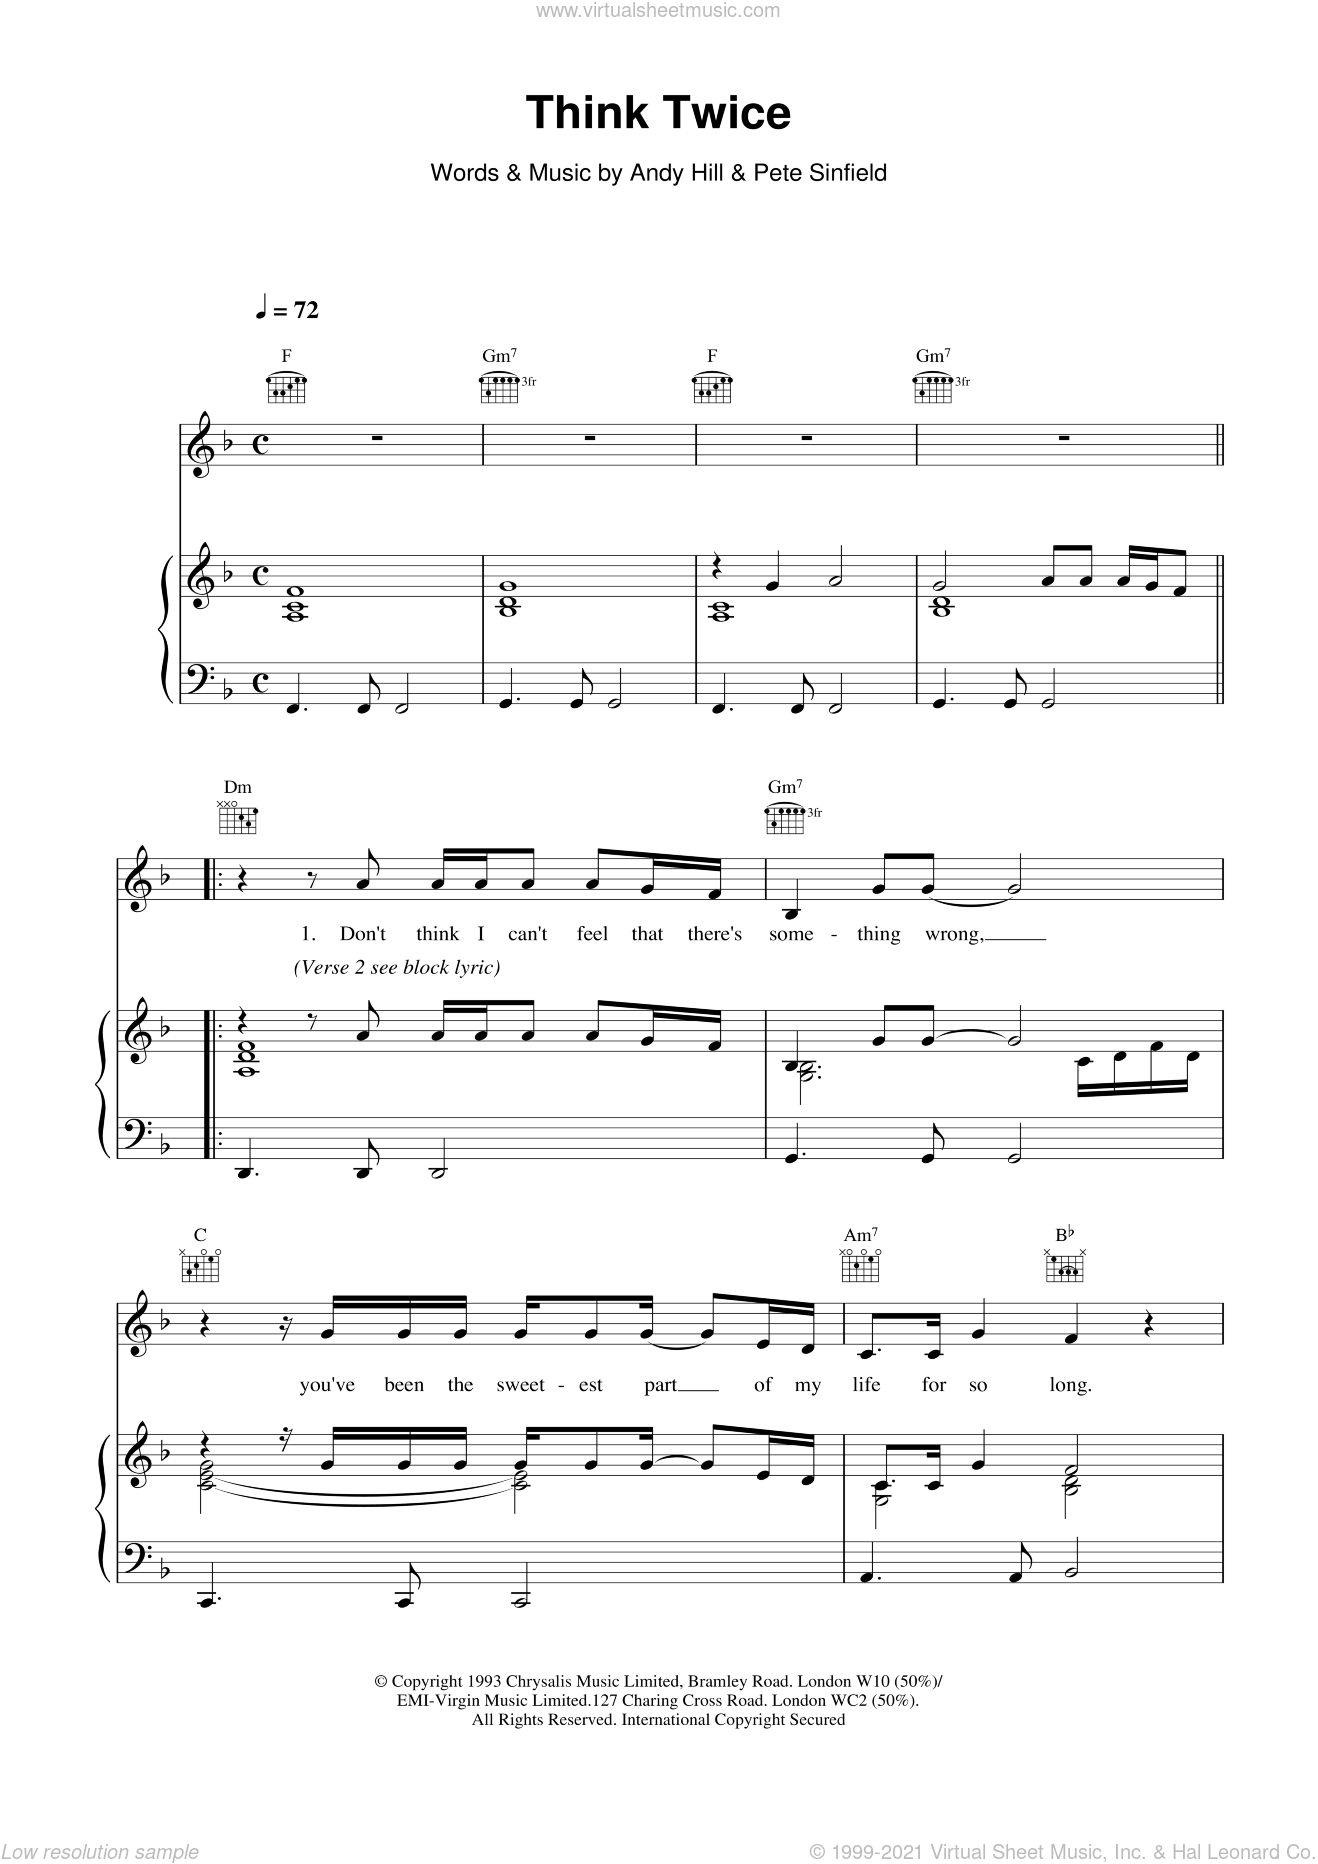 DON'T THINK TWICE Sheet music for Guitar (Solo)